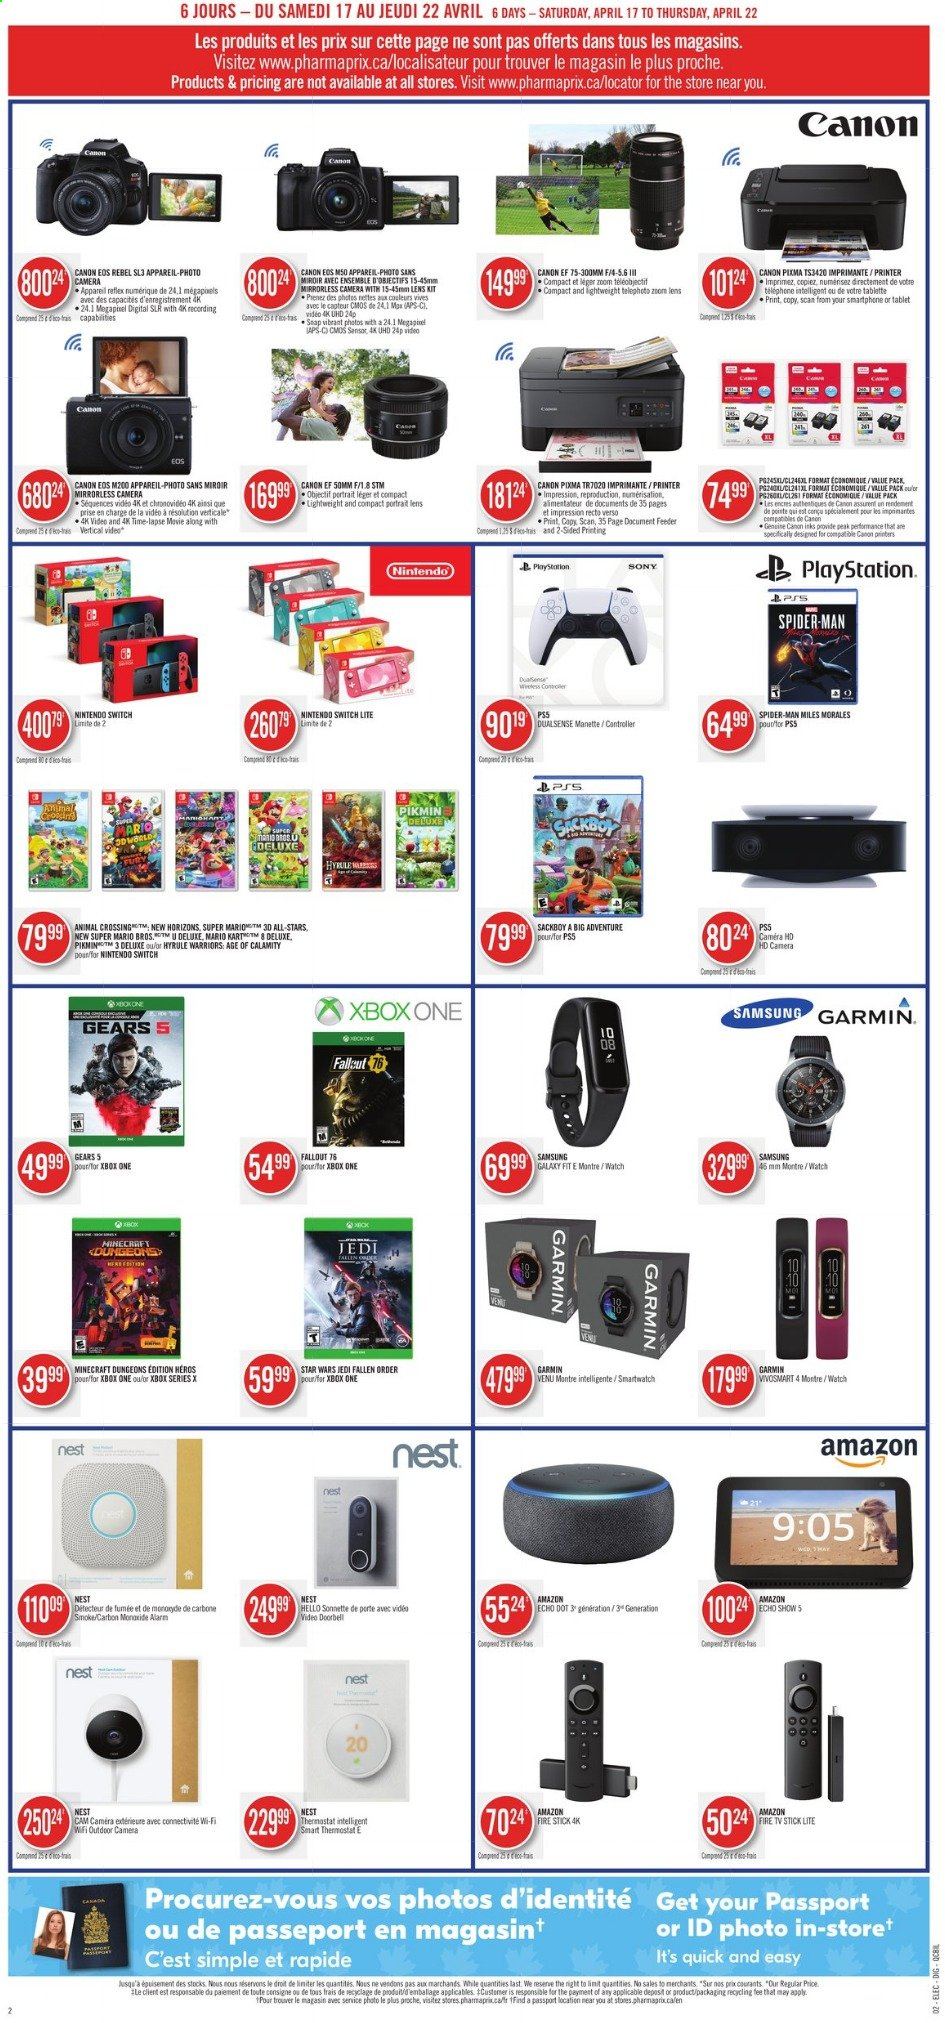 thumbnail - Circulaire Pharmaprix - 17 Avril 2021 - 22 Avril 2021 - Produits soldés - Sony, Samsung, smartphone, tablette, montre, caméra, Canon, Xbox, Xbox One, smartwatch, Nintendo Switch, Playstation. Page 14.